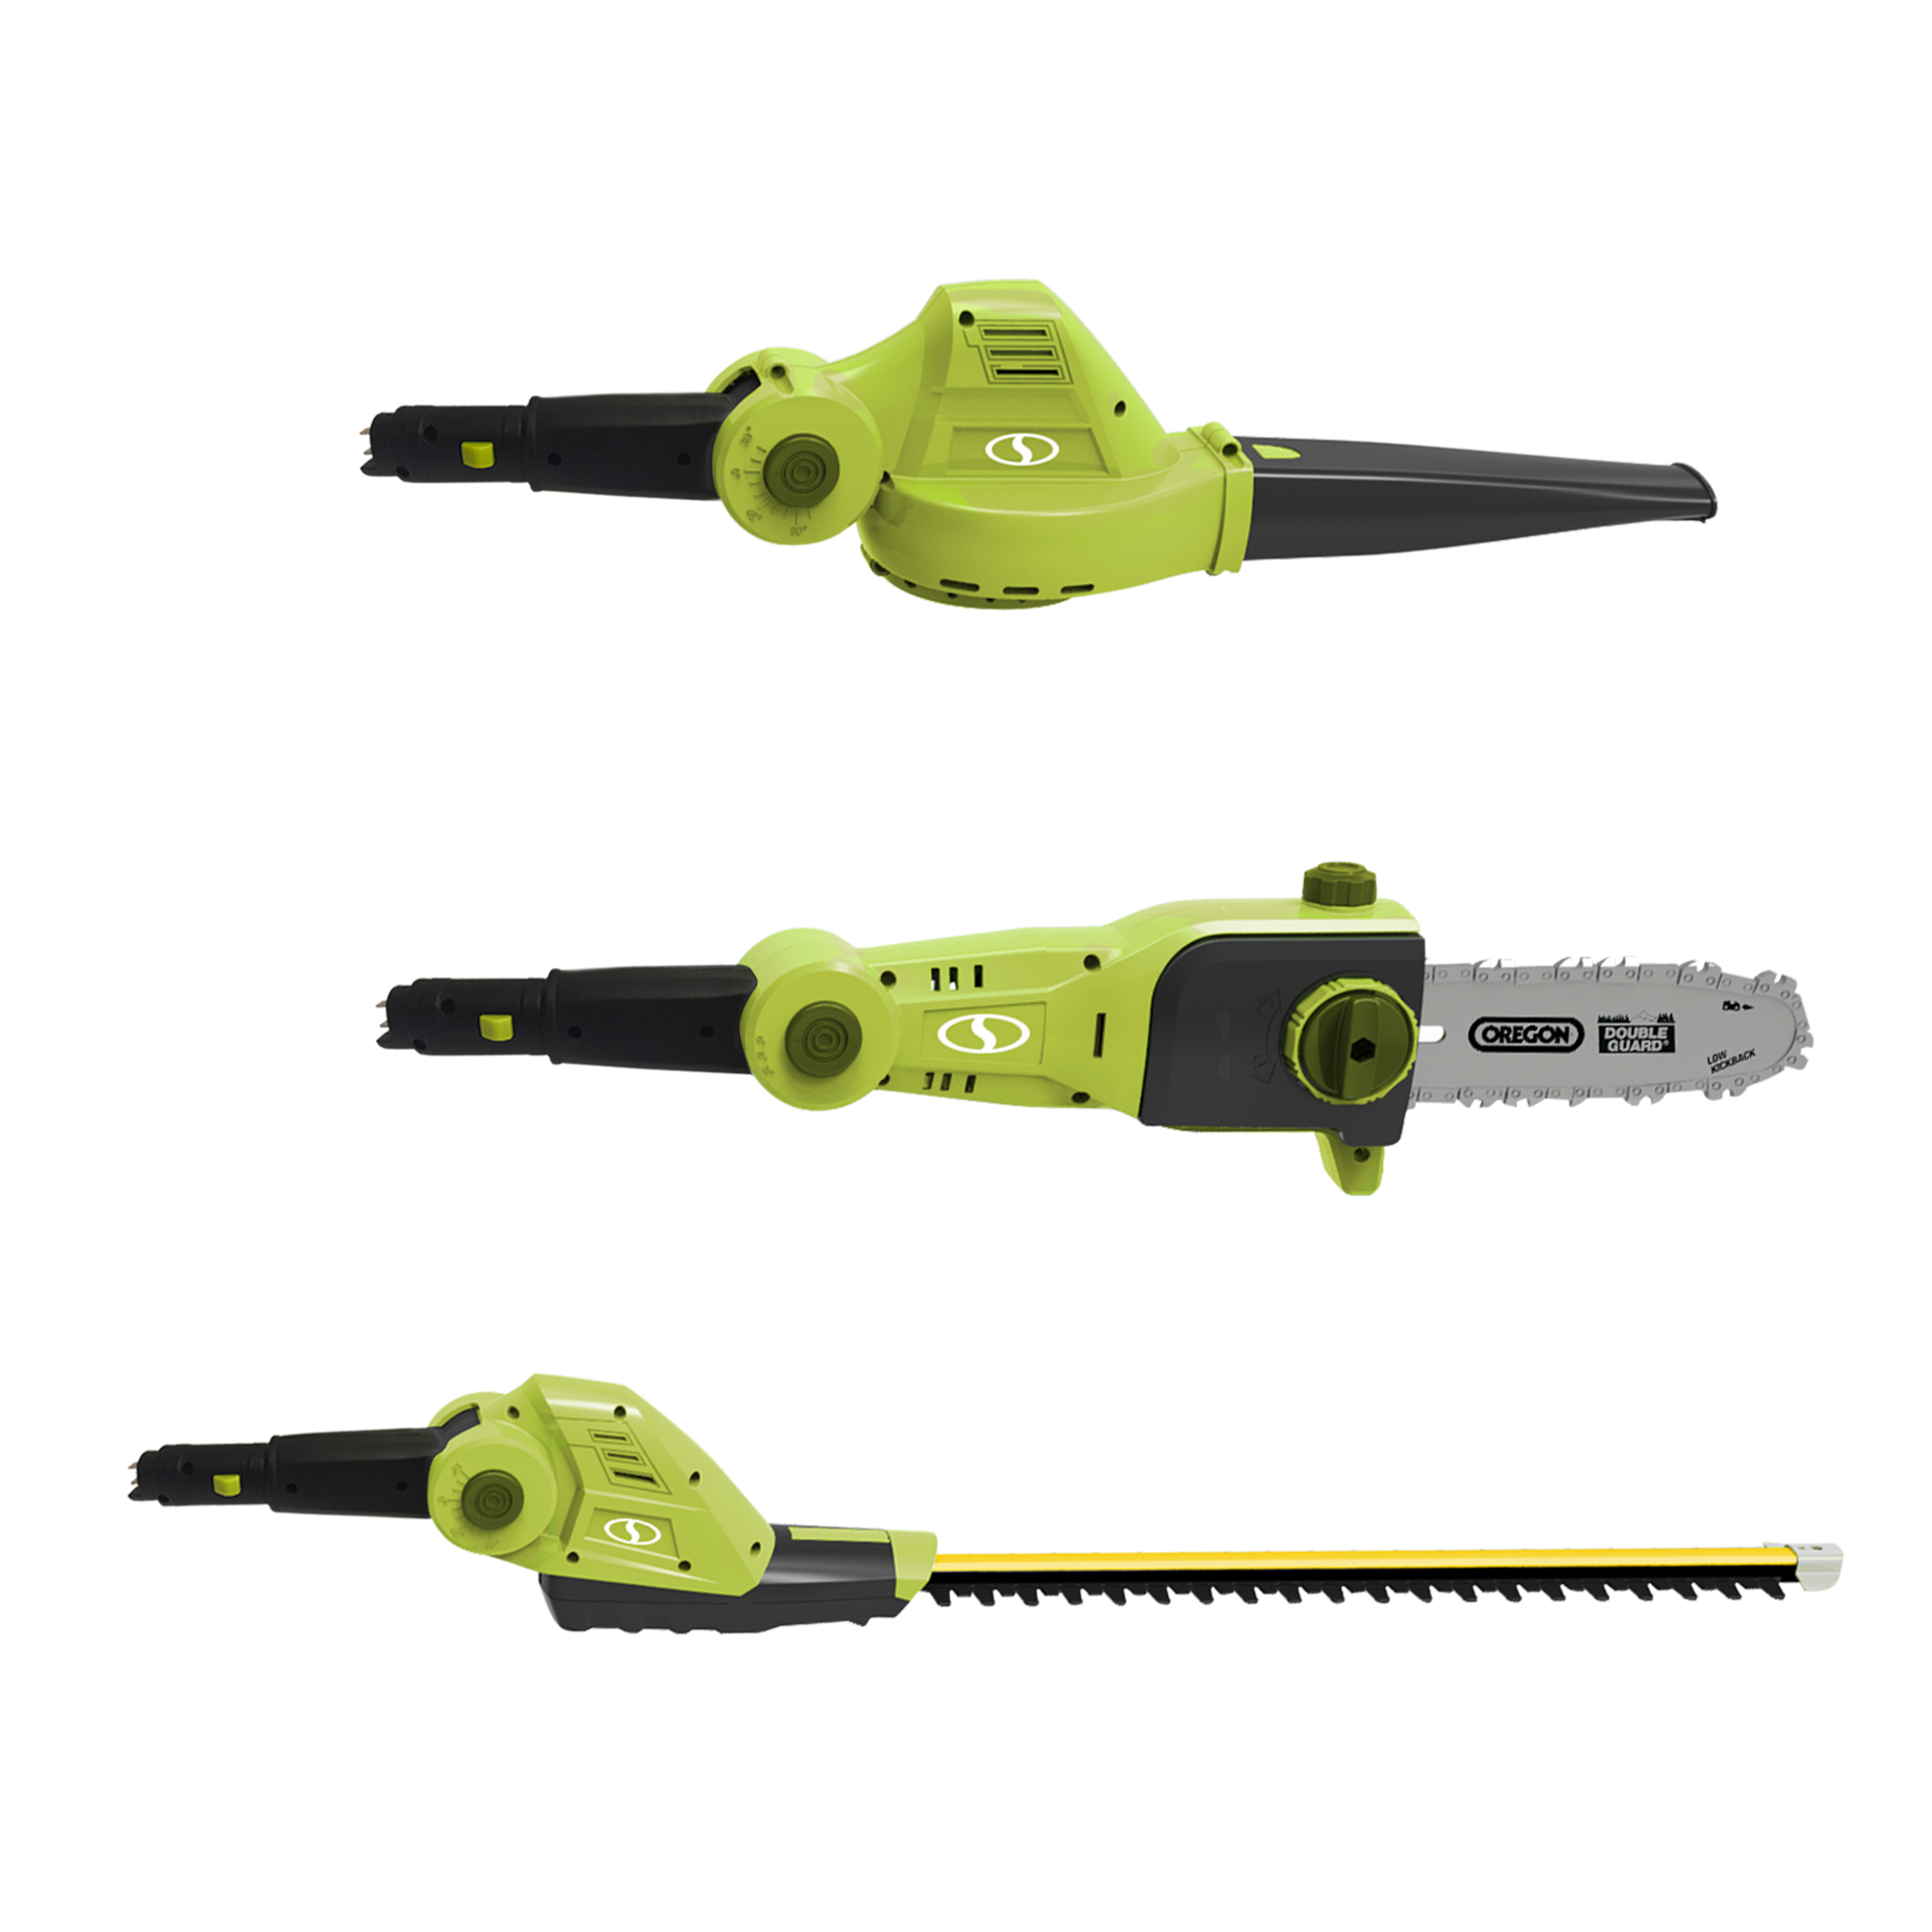 Sun Joe 24V Cordless 3-in-1 Hedge Trimmer + Pole Saw + Leaf Blower, 2.0-Ah Battery & Charger - image 4 of 24